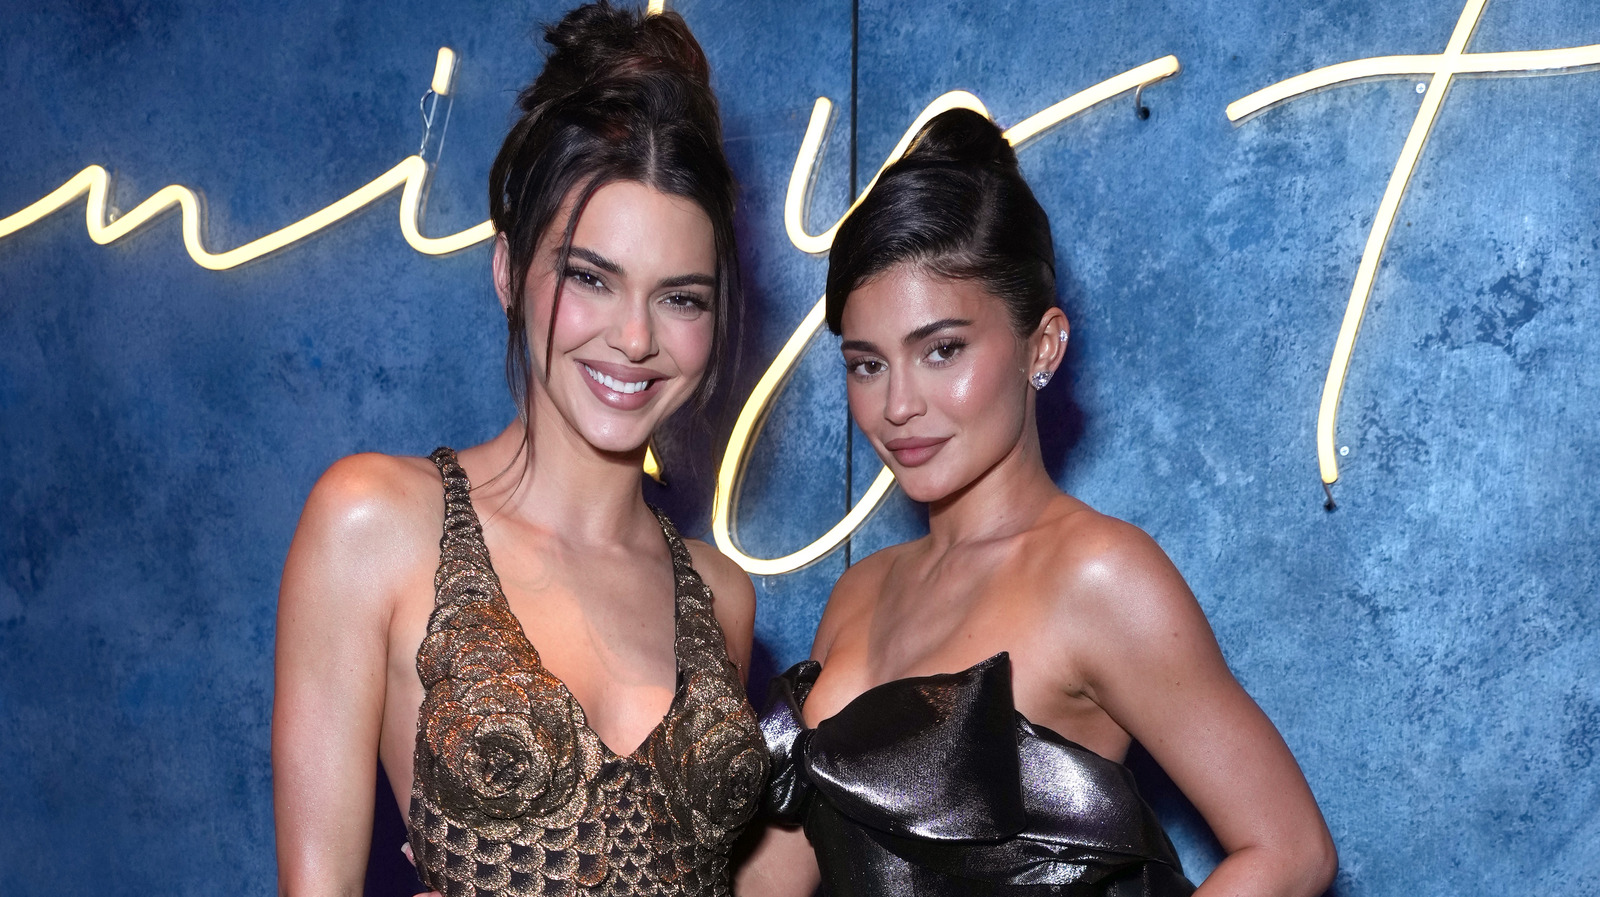 kendall vs kylie fans arent holding back their thoughts about which jenner has the best style